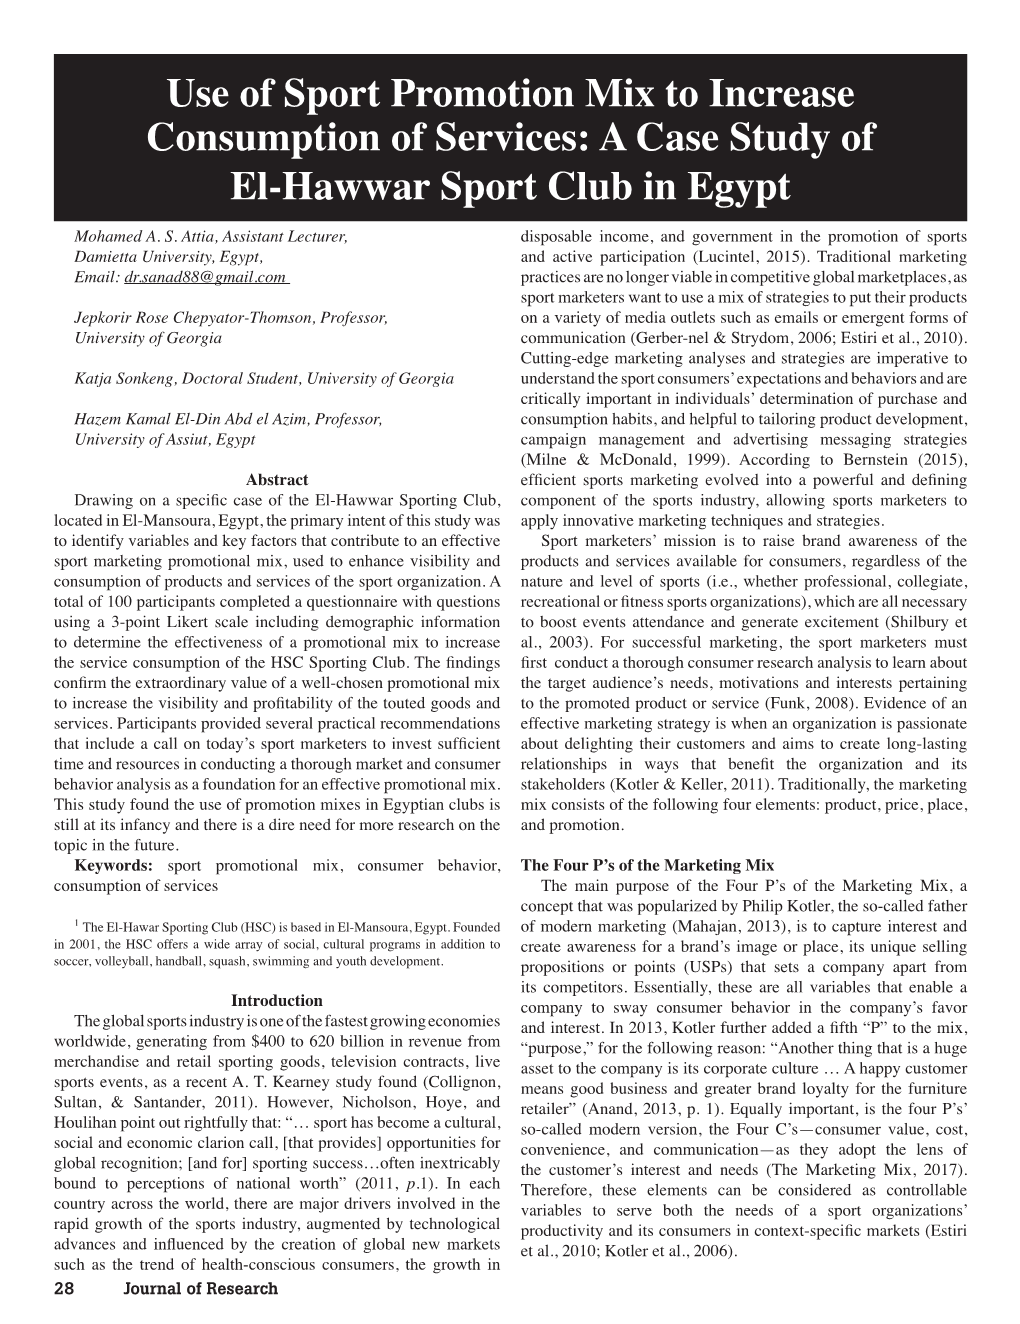 Use of Sport Promotion Mix to Increase Consumption of Services: a Case Study of El-Hawwar Sport Club in Egypt Mohamed A